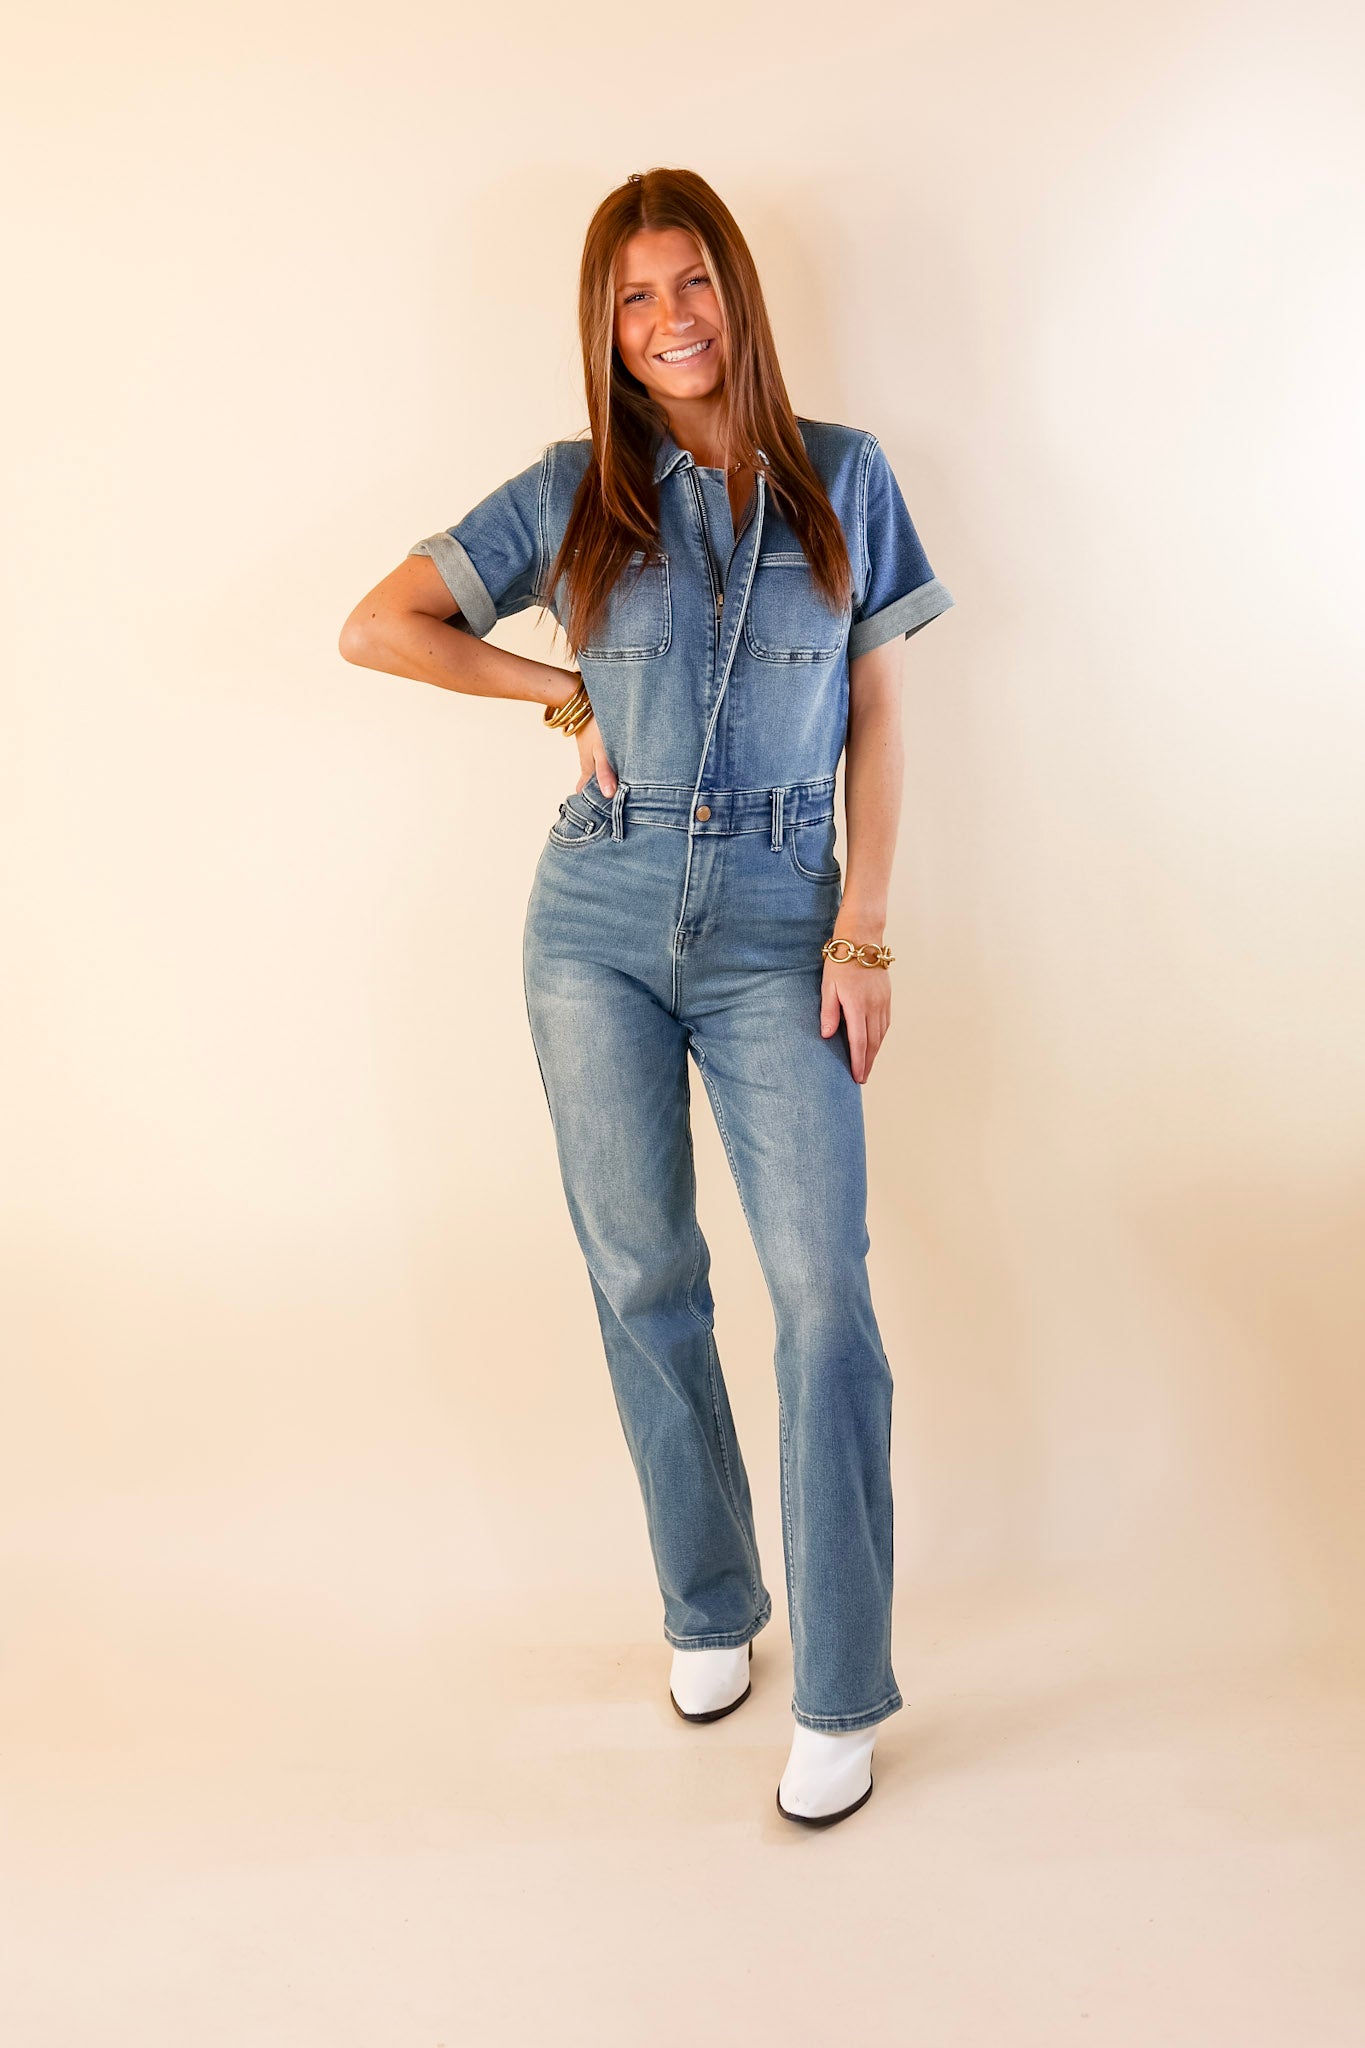 Judy Blue | New To The City Short Sleeve Denim Jumpsuit in Medium Wash - Giddy Up Glamour Boutique